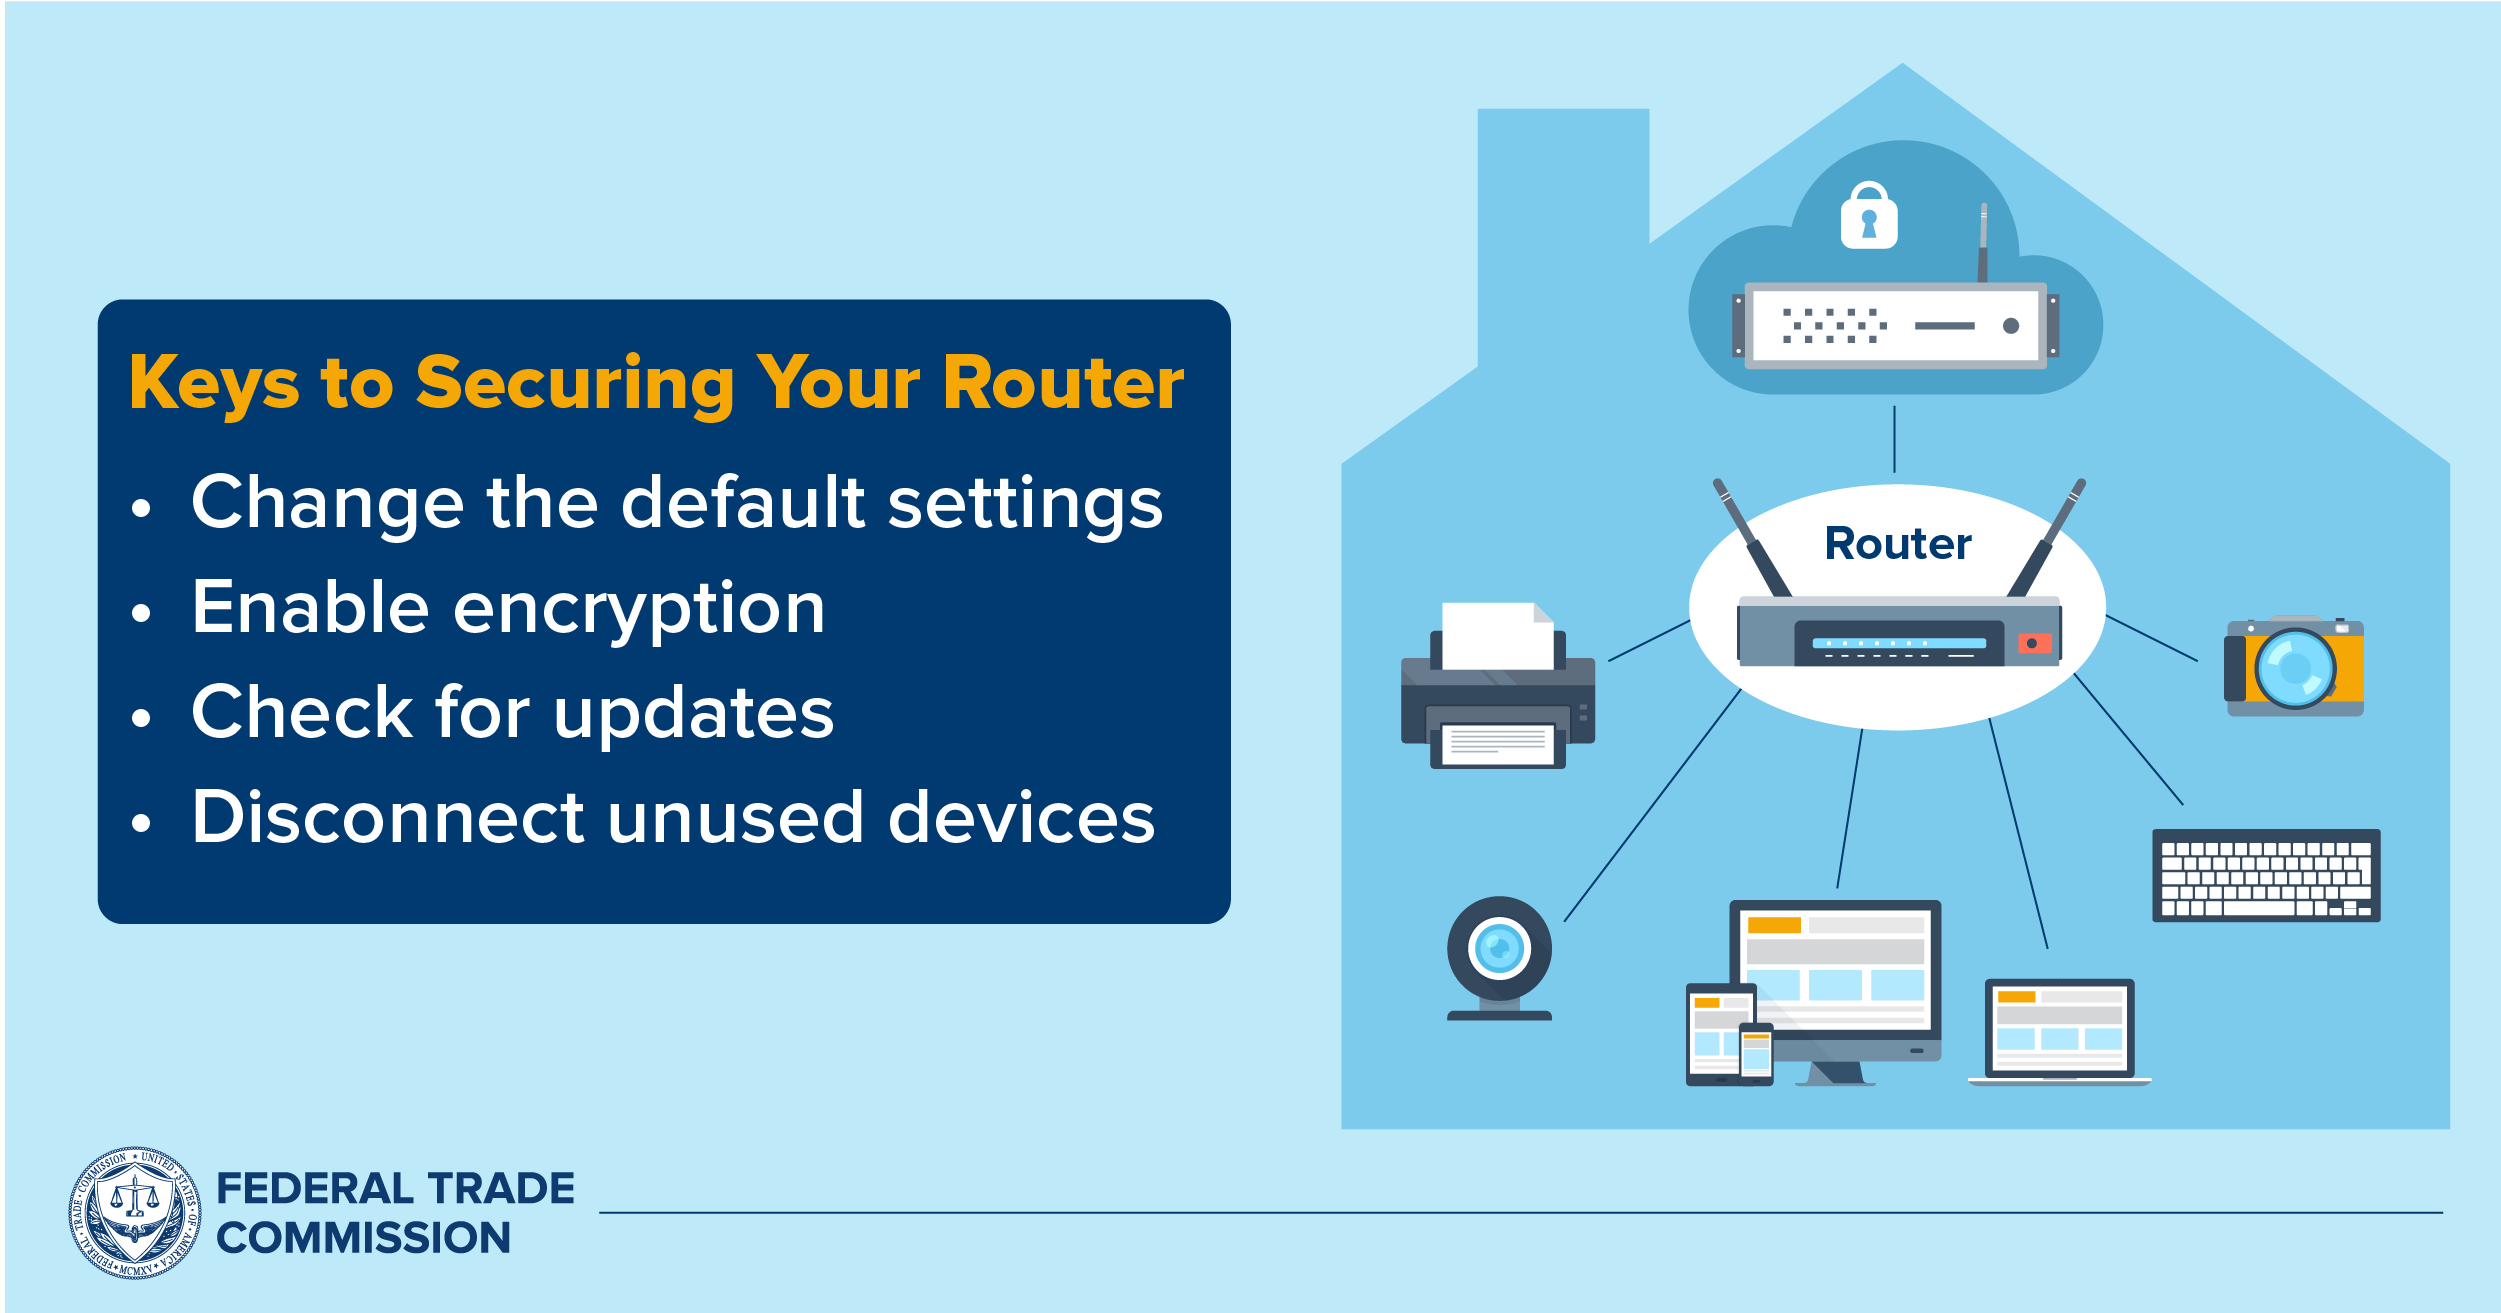 Inform other members of the community or household about the router password hack
Advise them to change their passwords and enable security measures on their devices